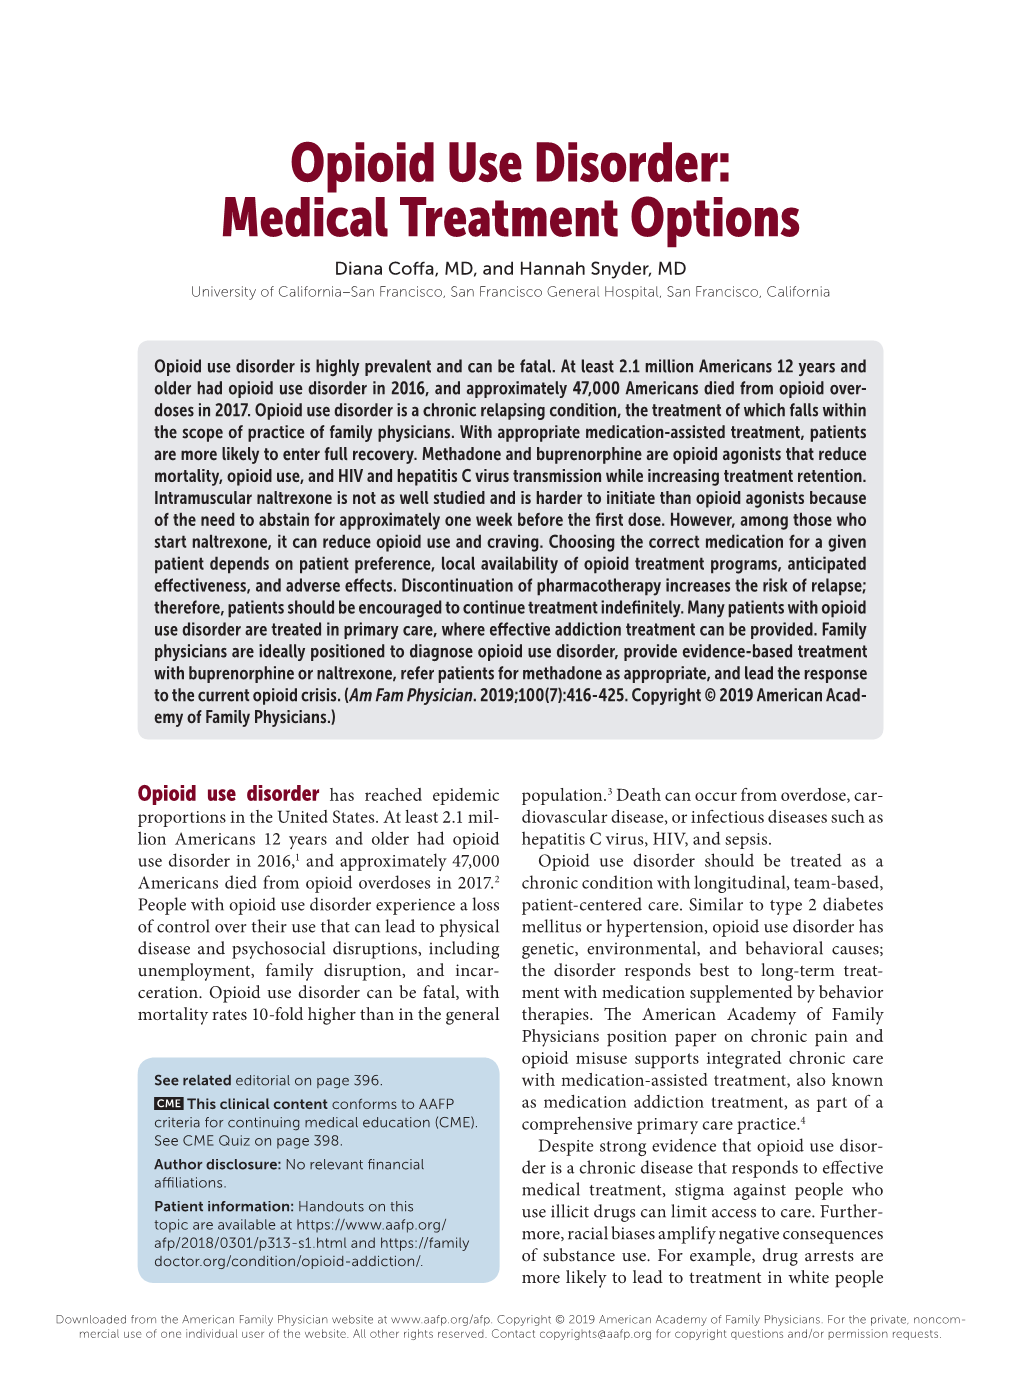 Opioid Use Disorder: Medical Treatment Options